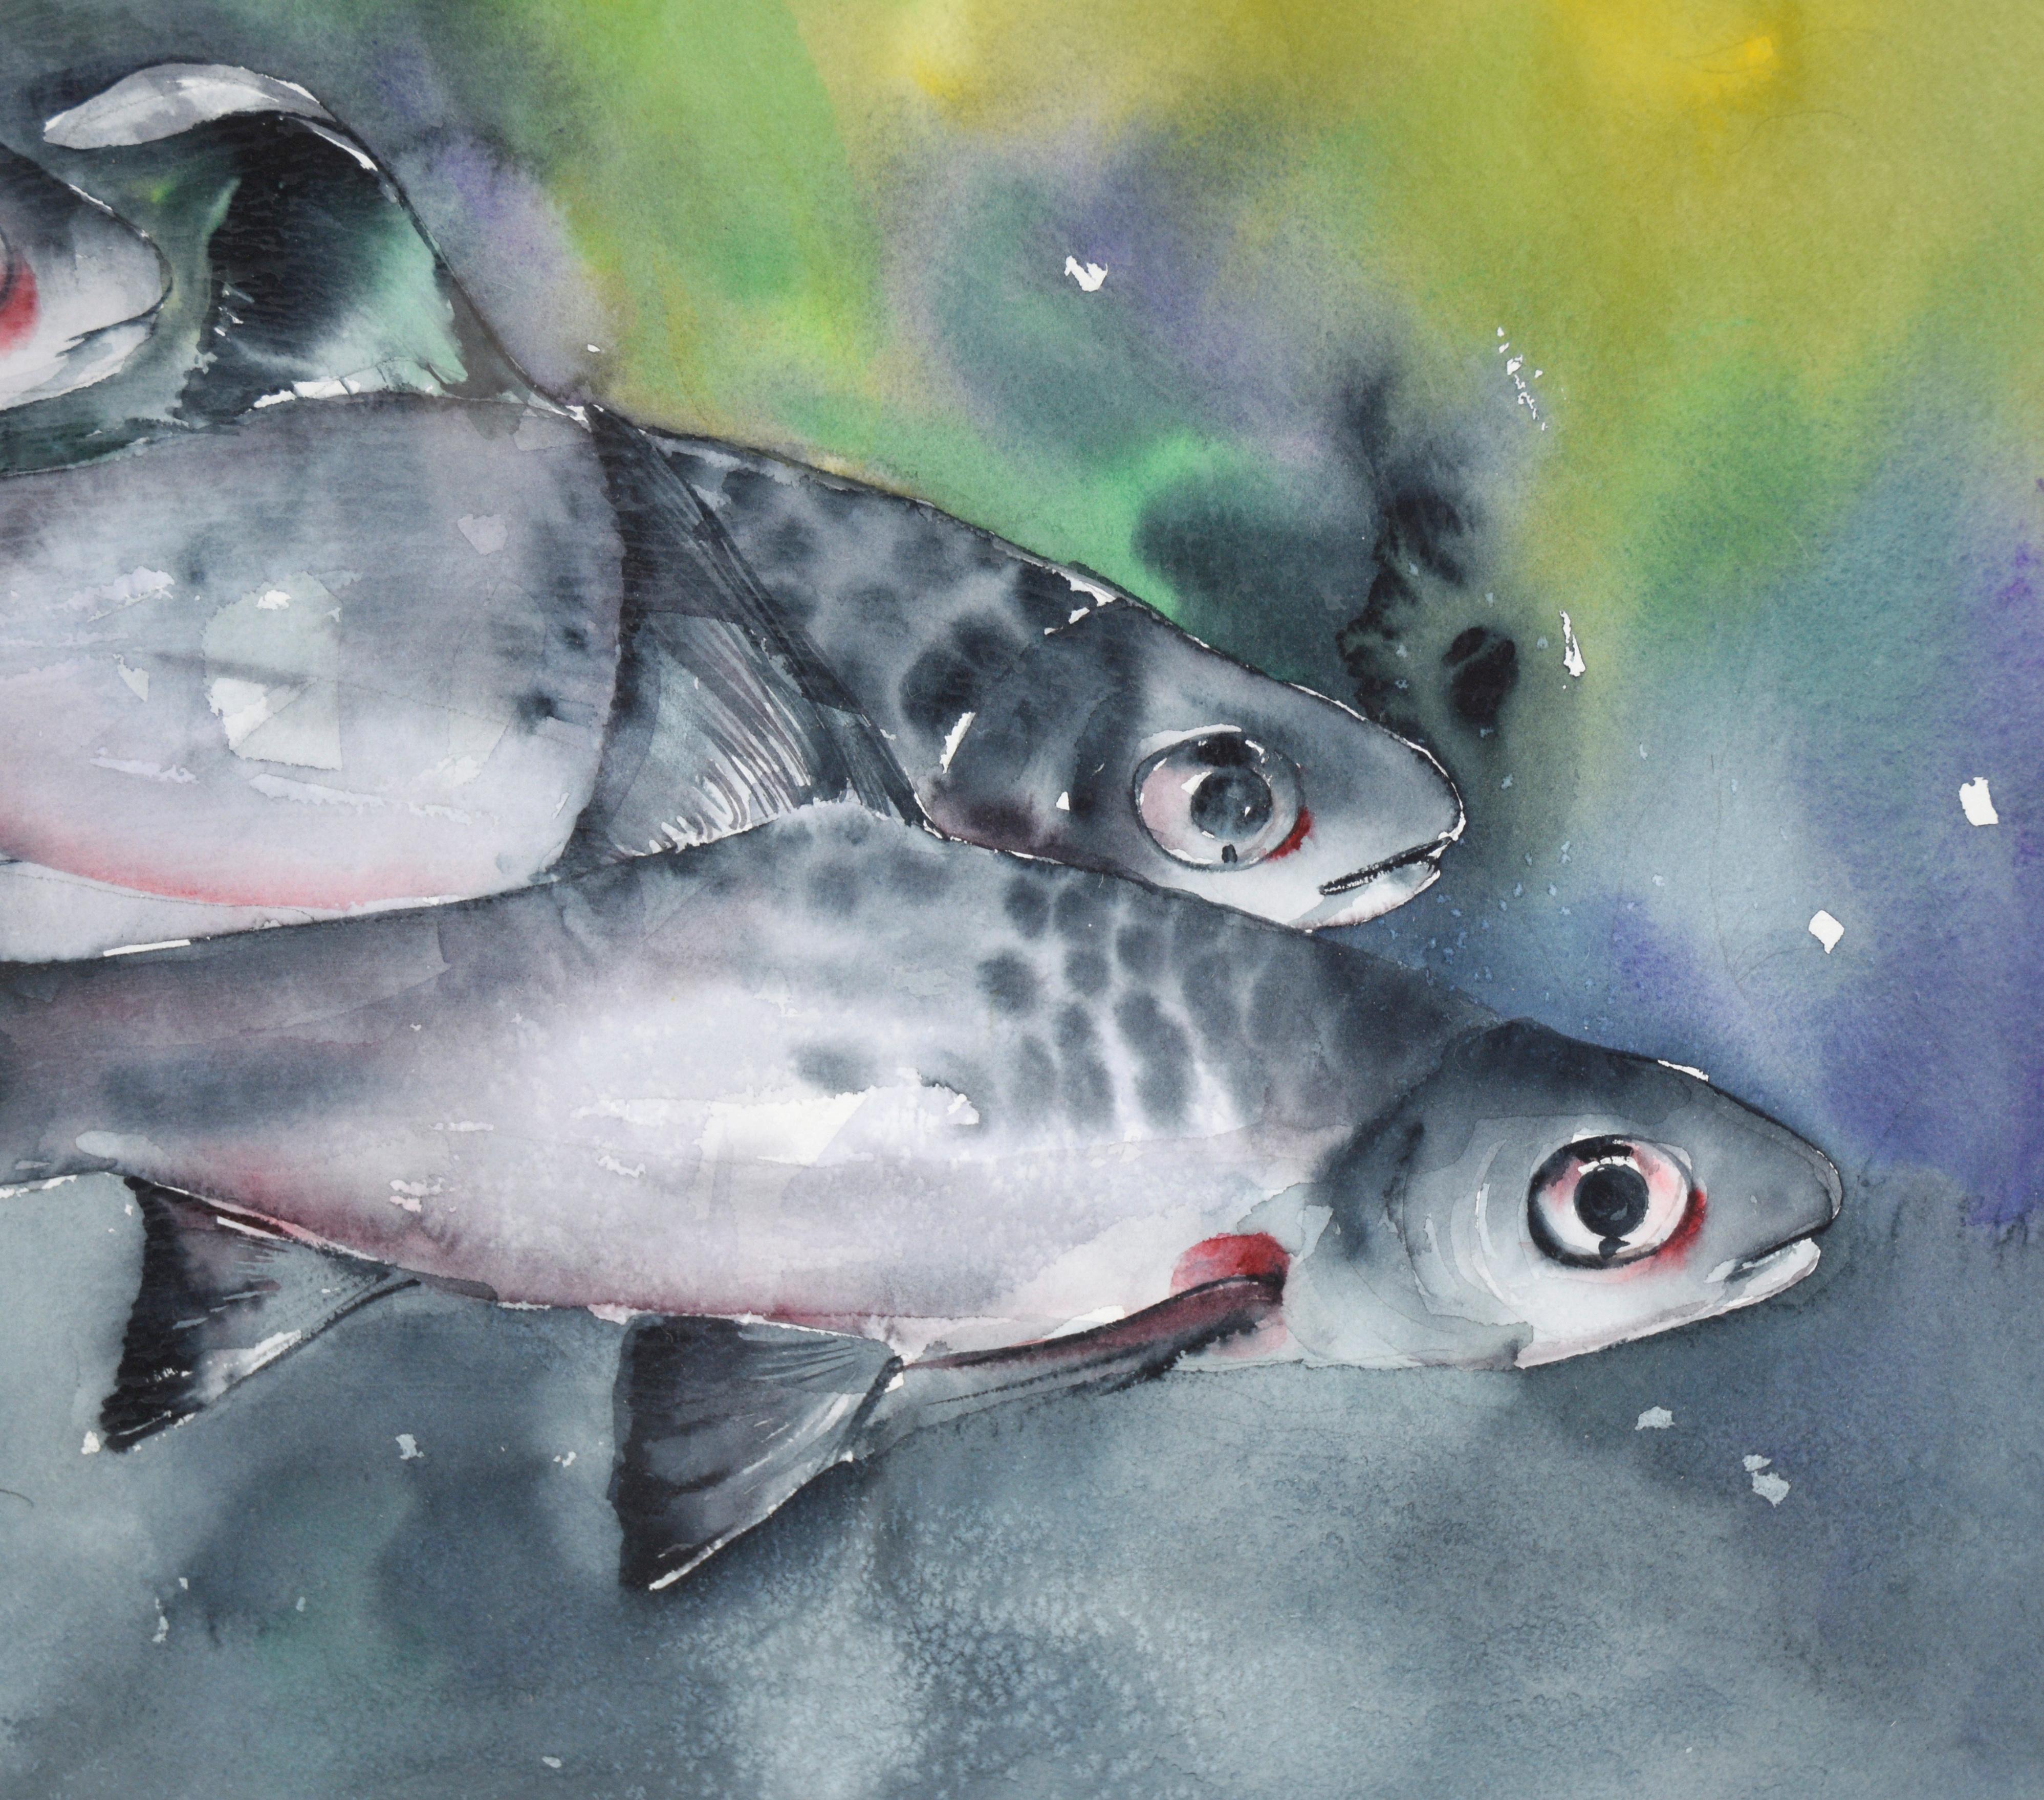 Three Fish Watercolor on Paper

Lively watercolor of three fish by unknown Japanese artist 